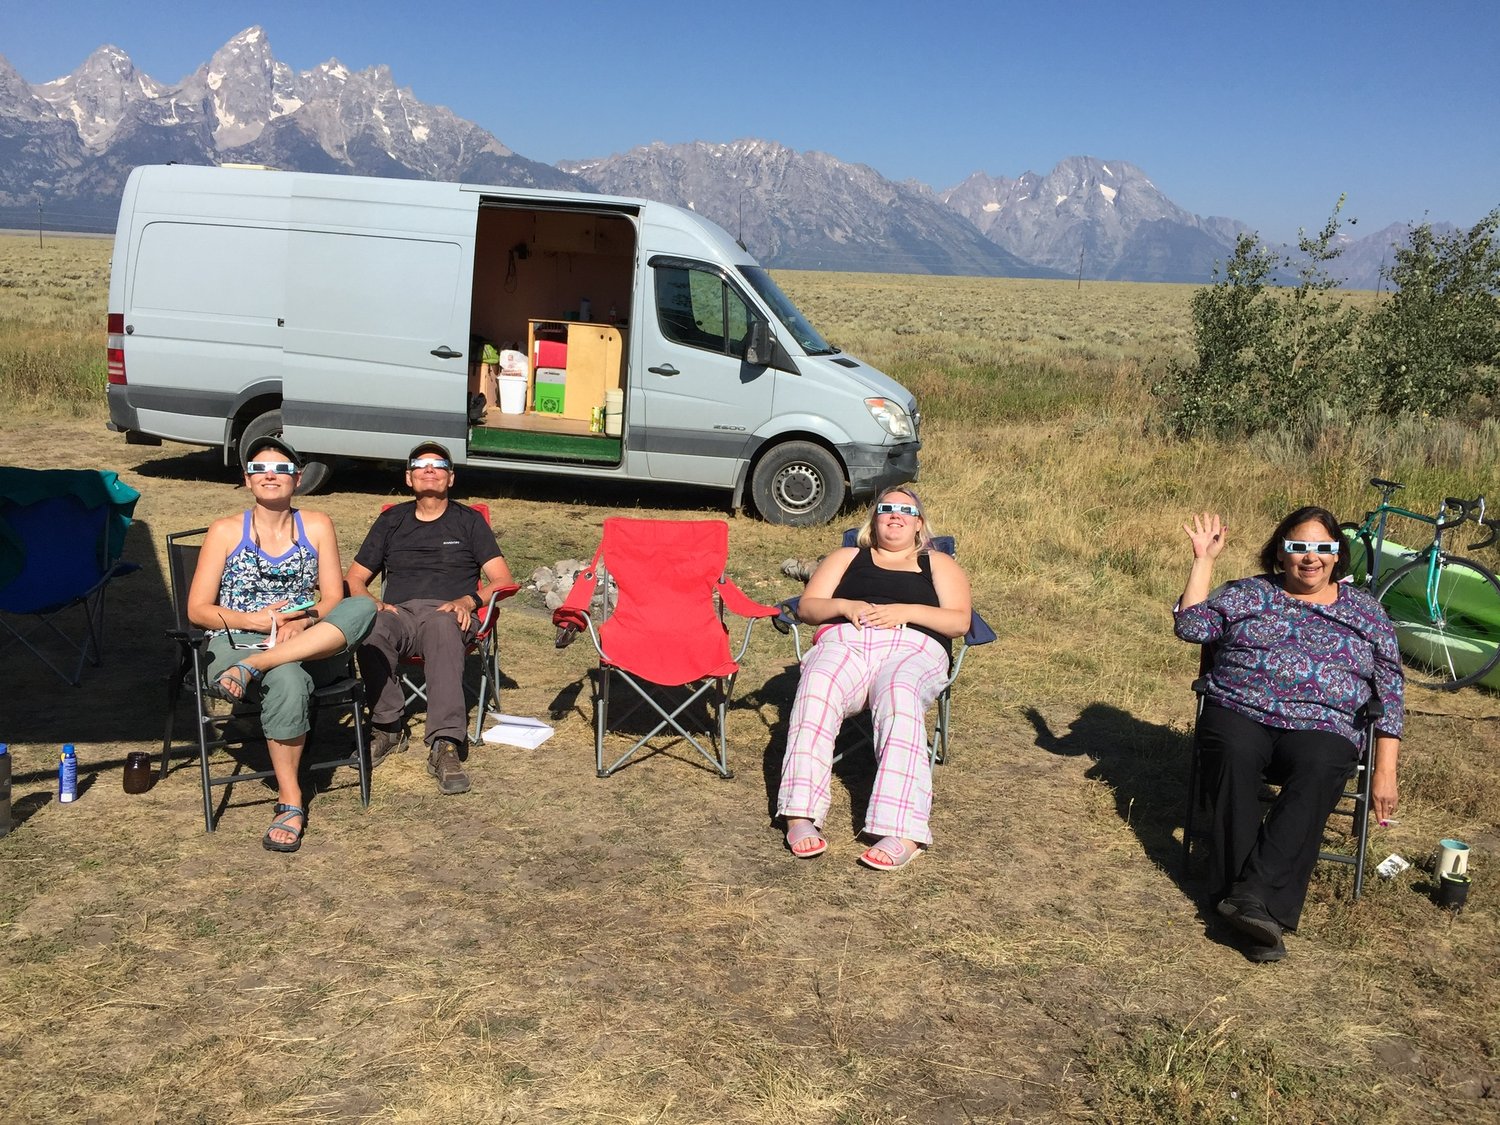 Eclipse-viewing made easy with vanlife at the Grand Tetons.